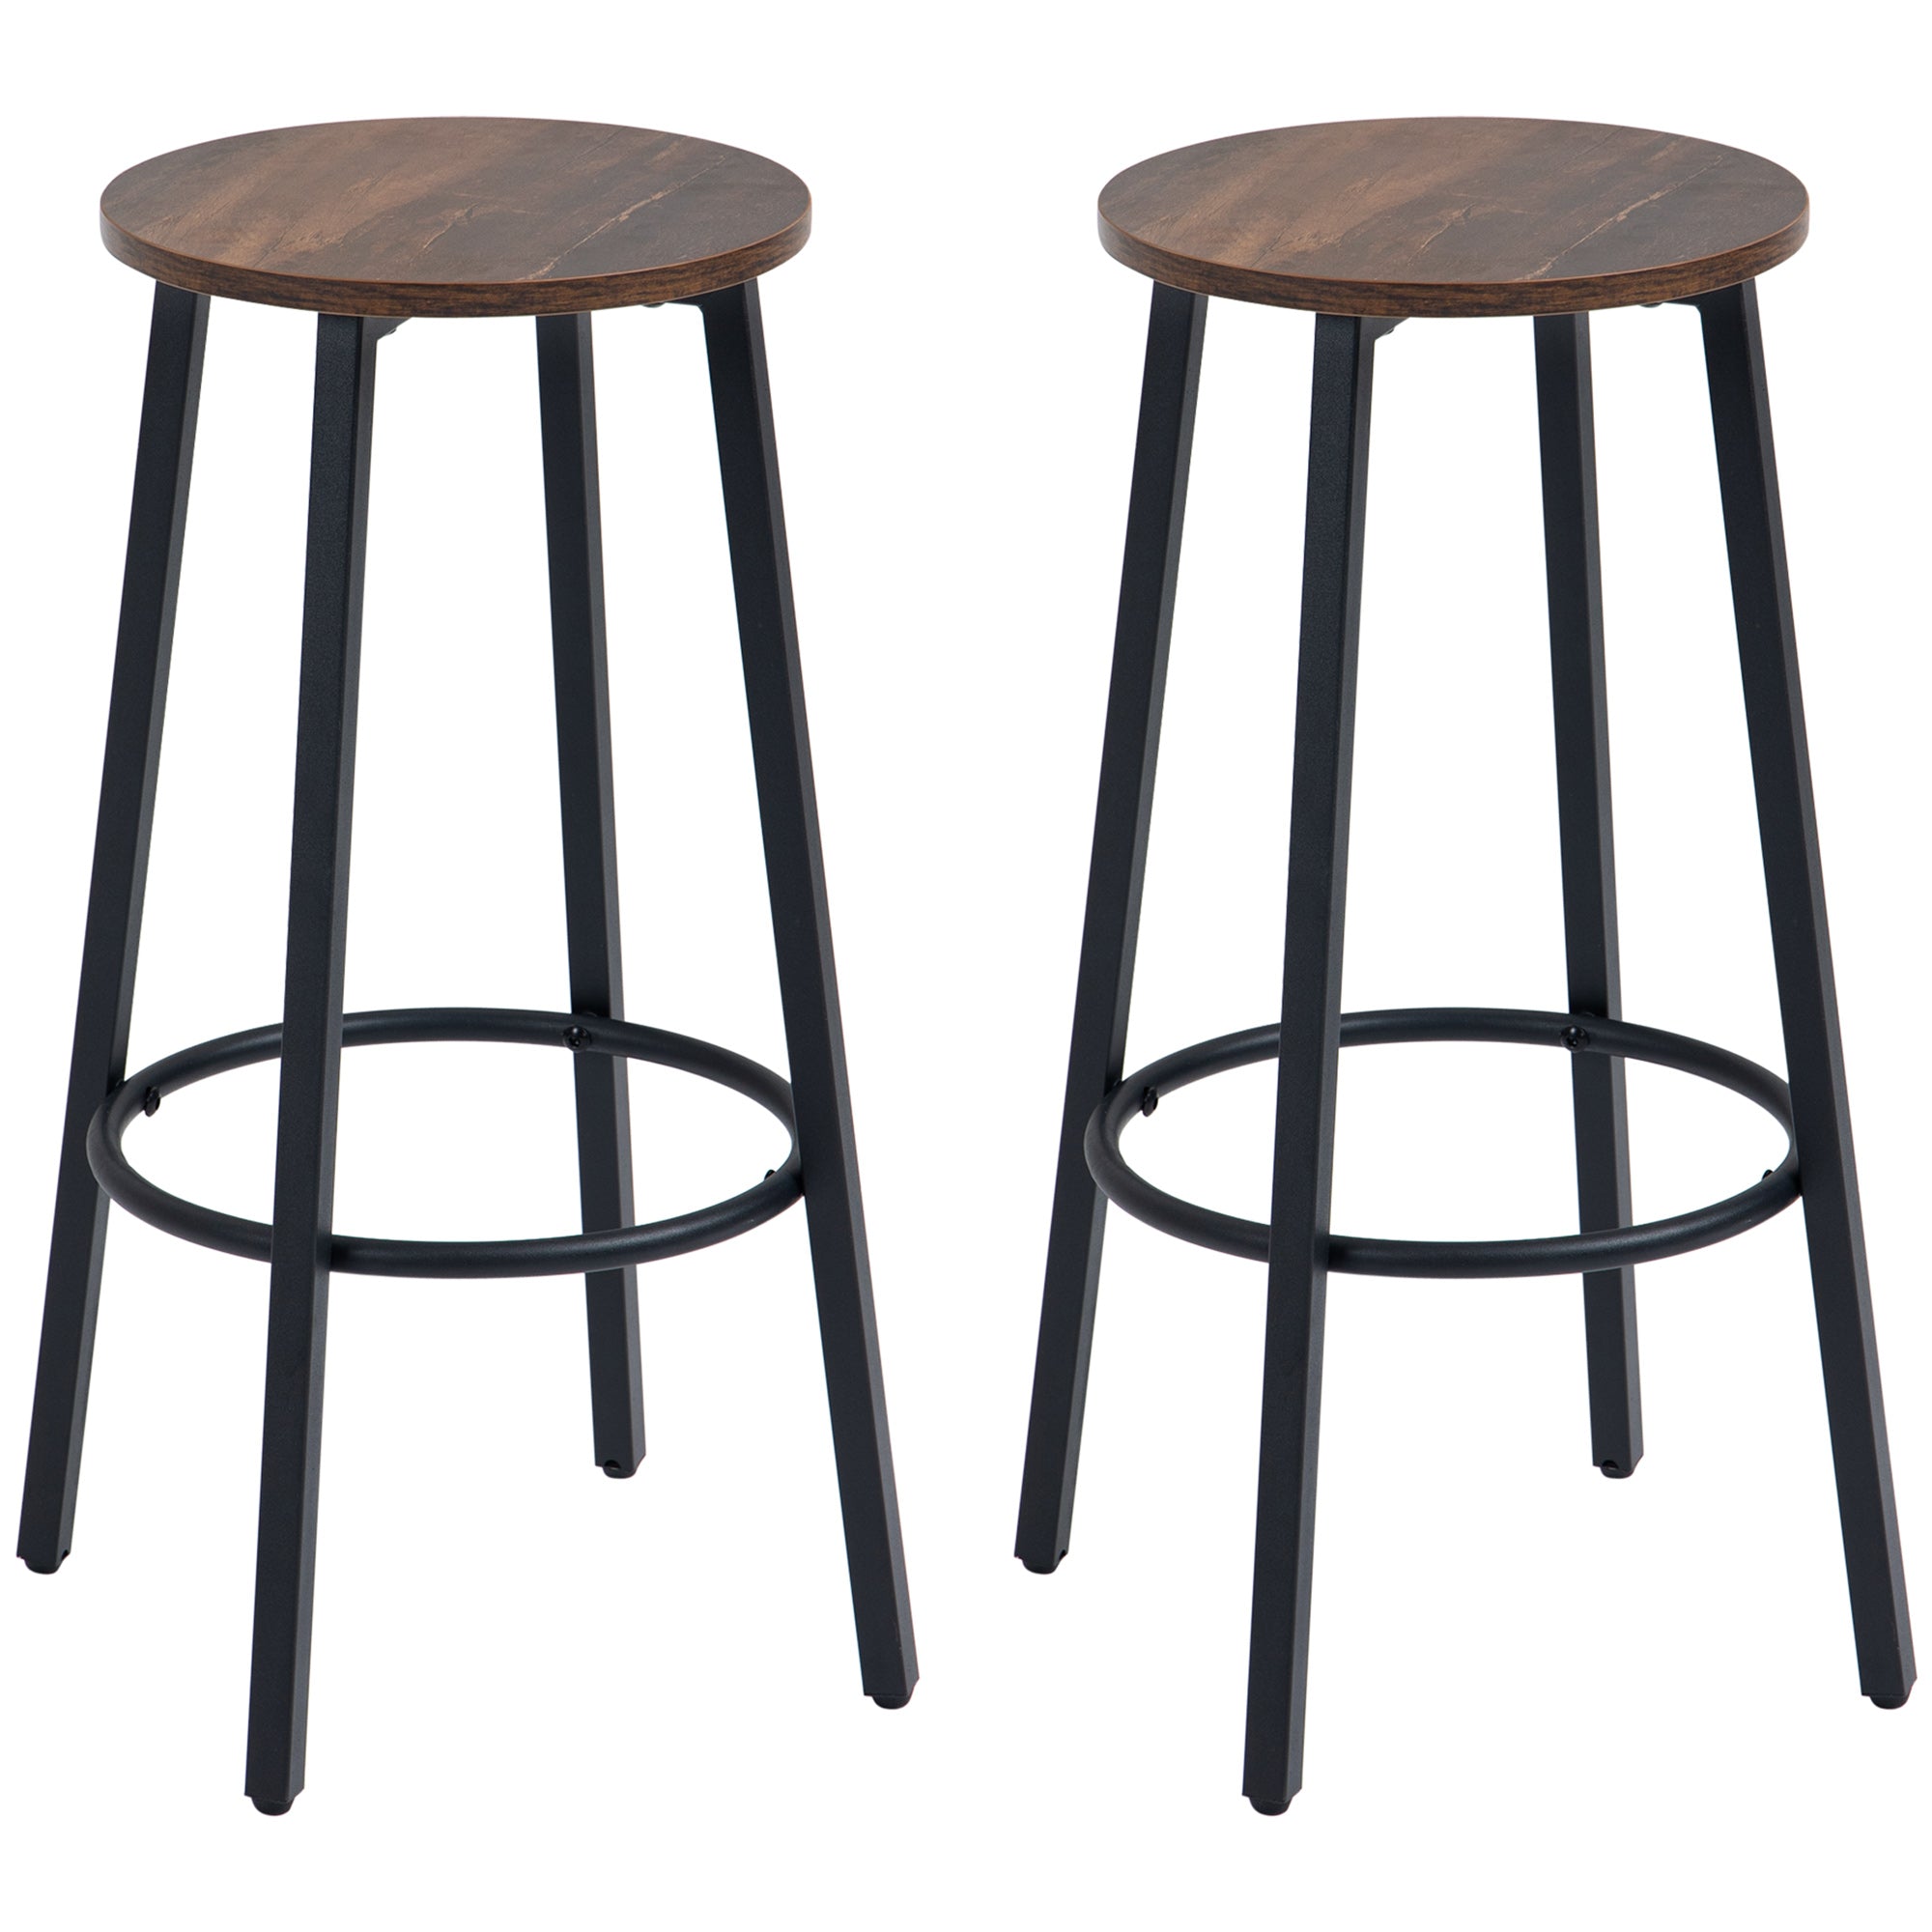 Set of 2 Bar Chairs with Round Footrest and Steel Legs,Industrial Bar Stools for Dining Room, Kitchen, Rustic Brown  AOSOM   